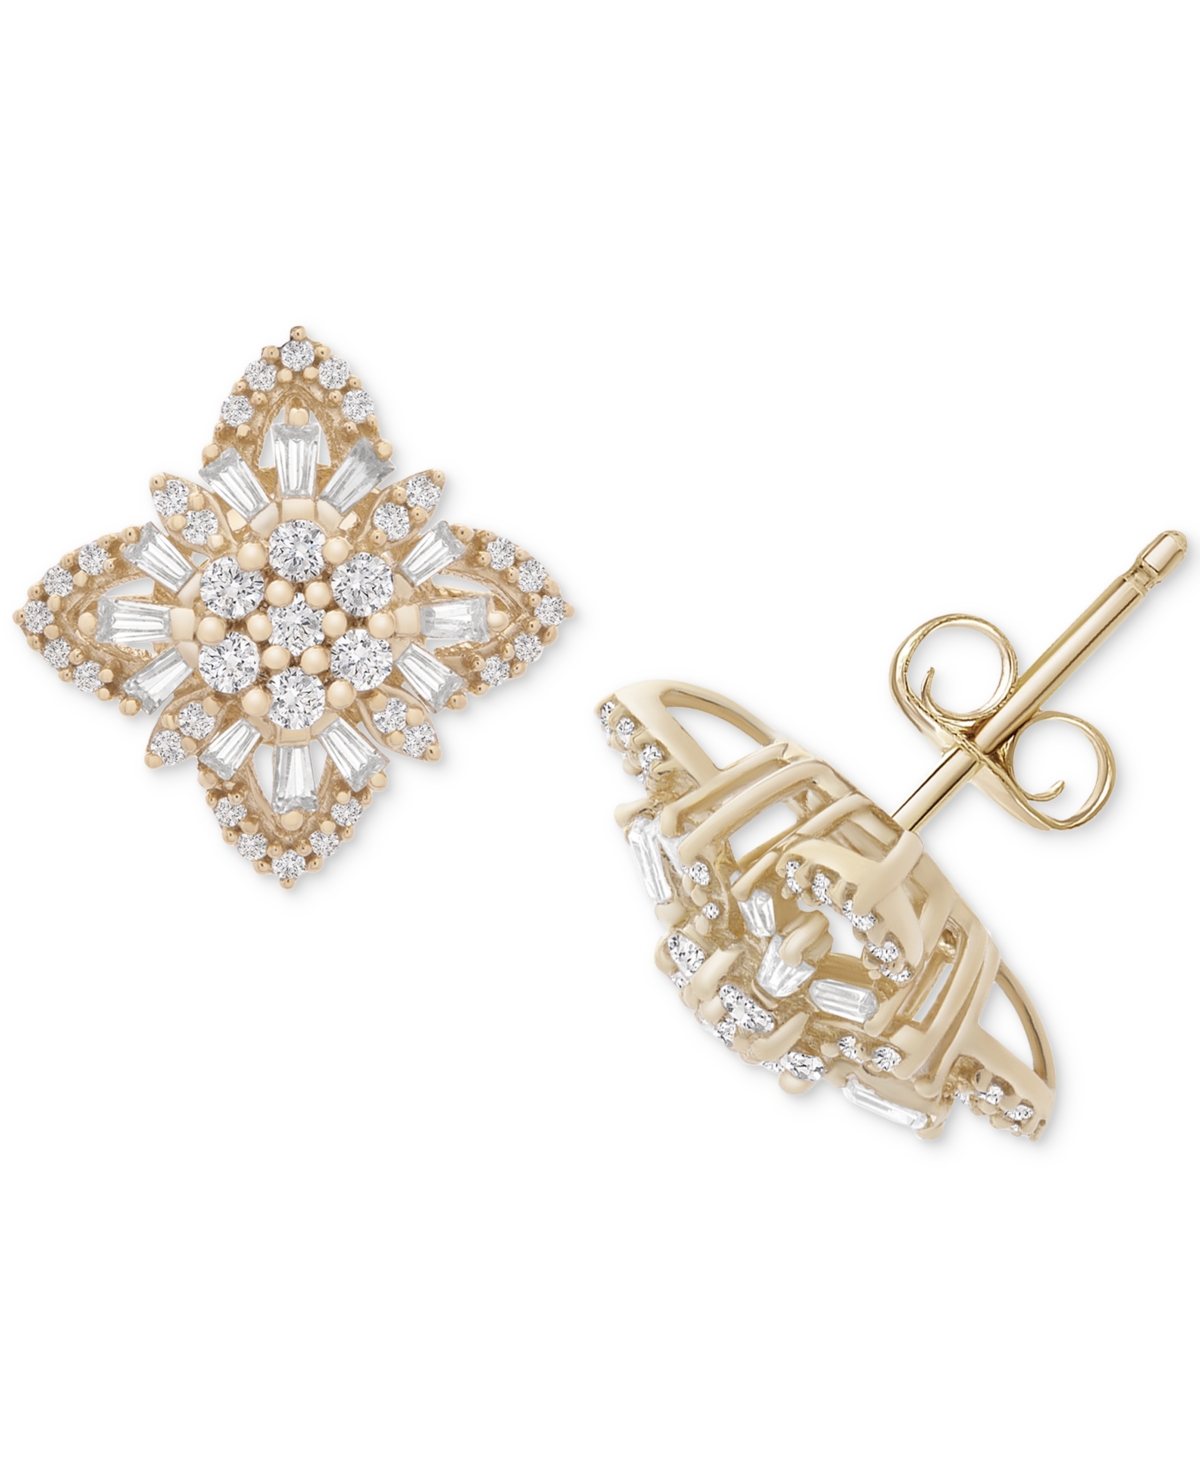 Diamond Round & Baguette Stud Earrings (1/2 ct. t.w.) in 14k Gold, Created for Macy's - Yellow Gold